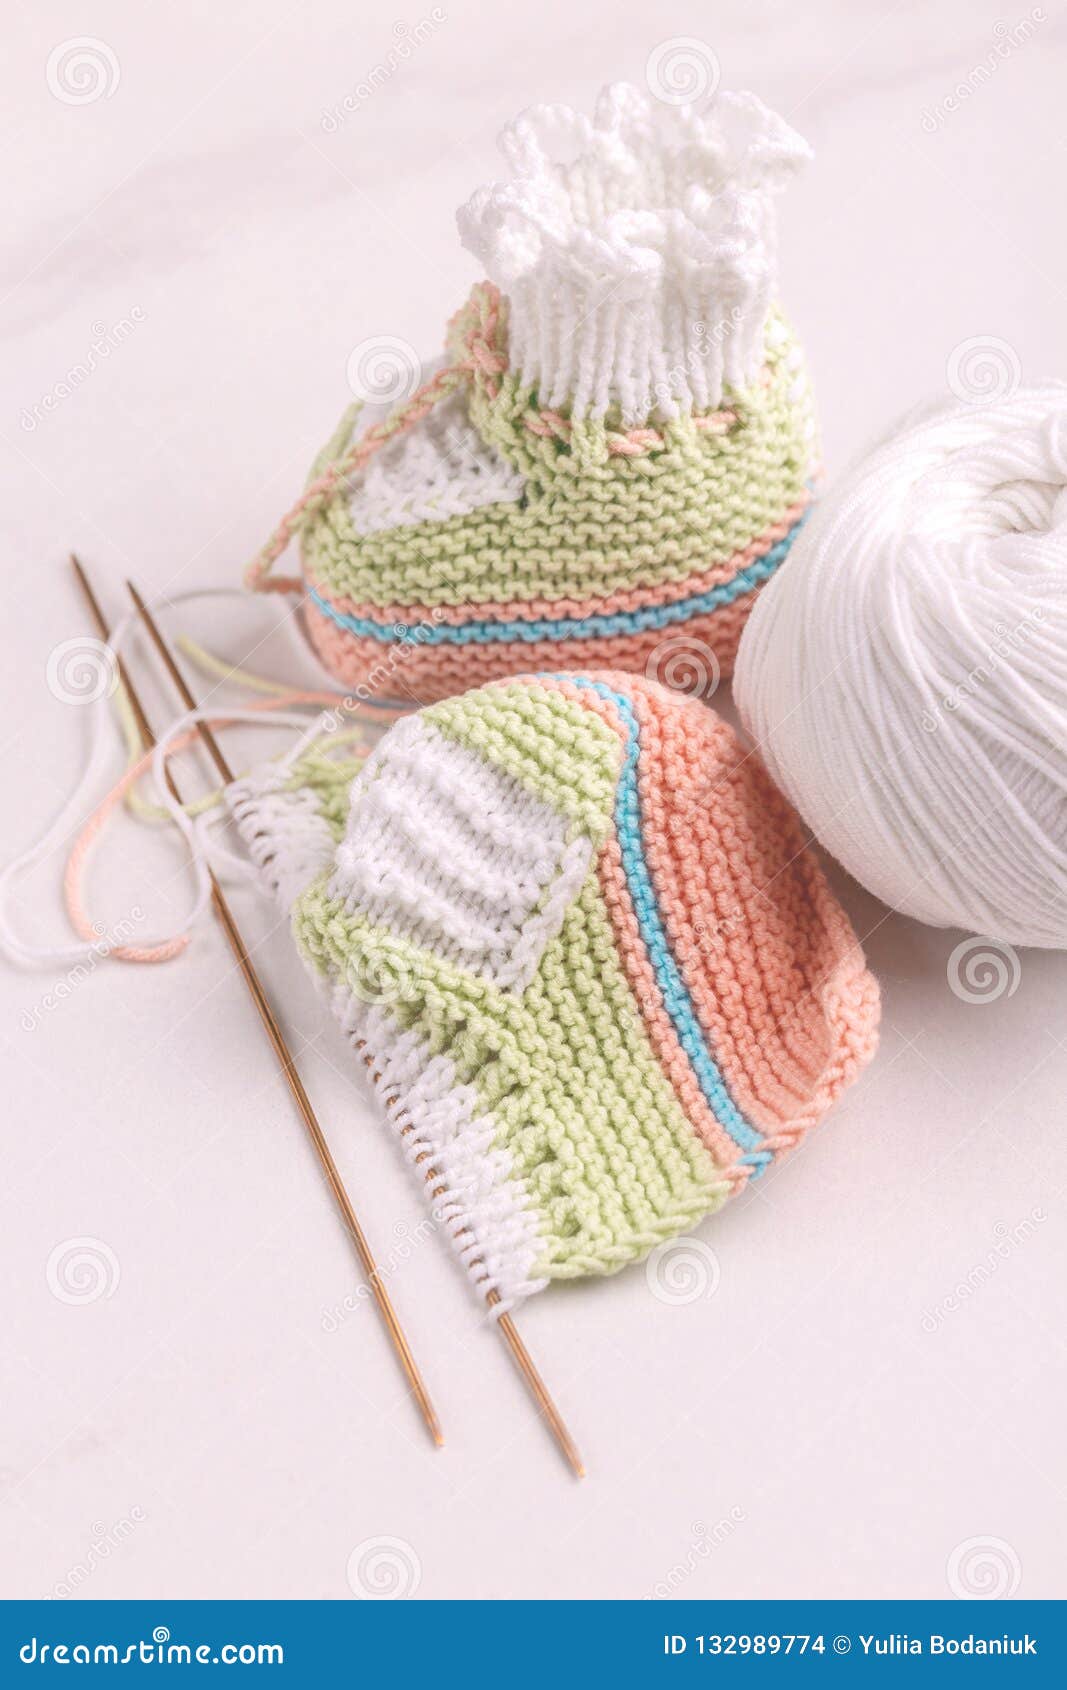 Knitted Baby Booties With Yarn And Needles Stock Photo